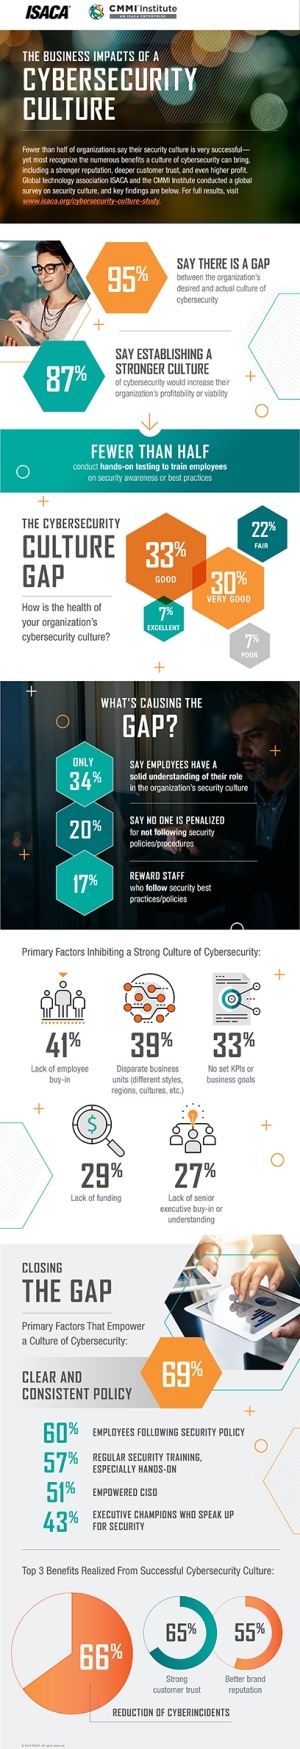 New global research from ISACA and the CMMI Institute shows 95% of organizations say there is a gap between the cybersecurity cultures they have and the ones they want. (Graphic: Business Wire)